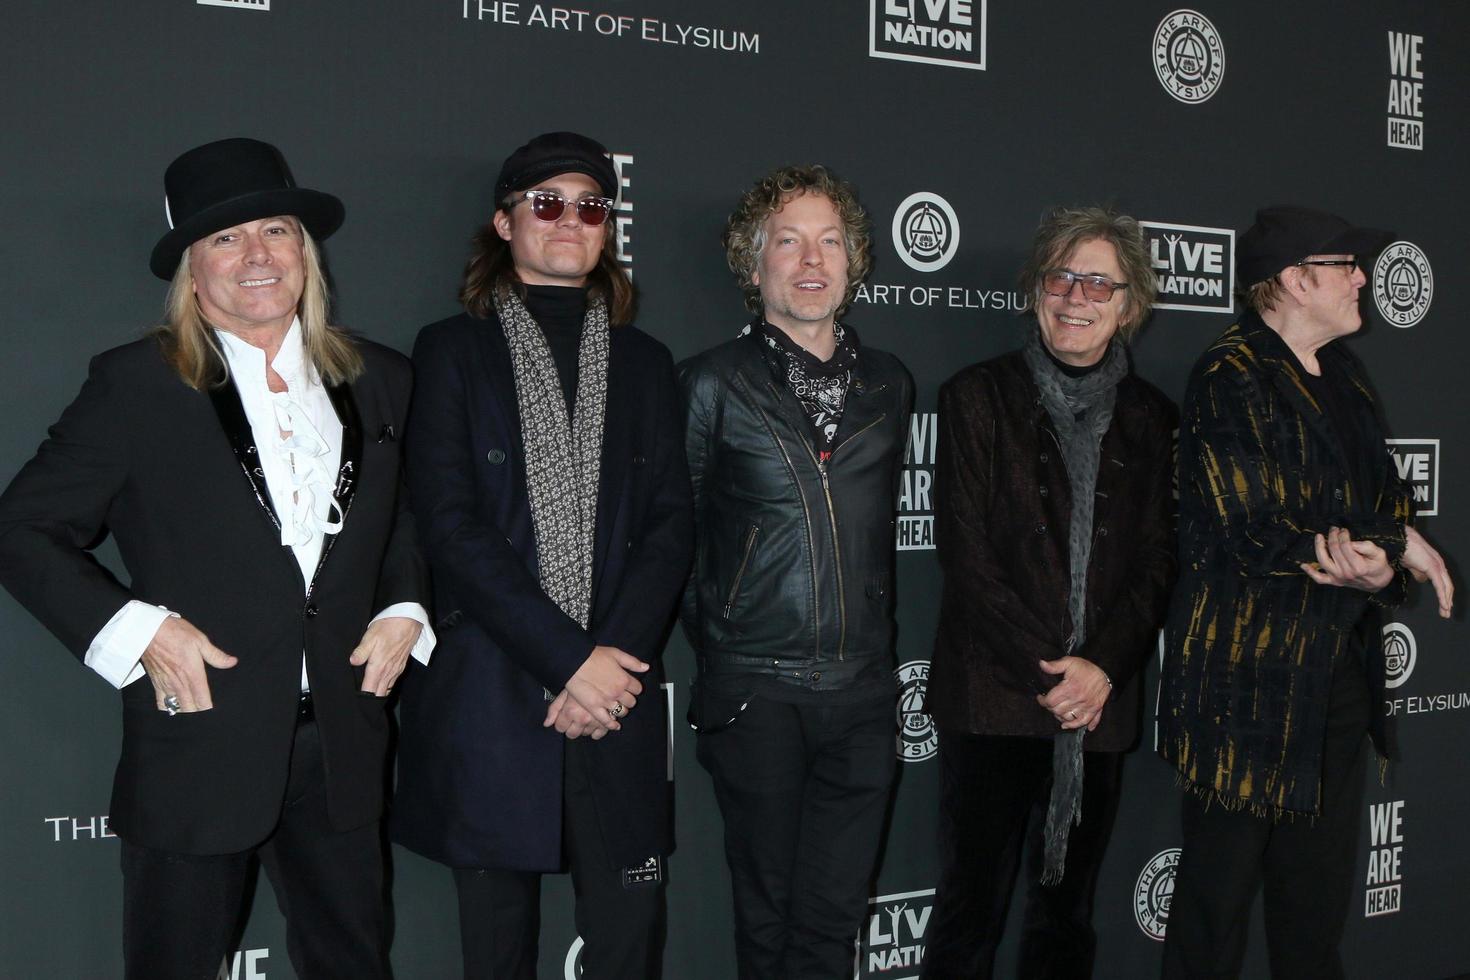 LOS ANGELES  JAN 4 - Robin Zander, Robin Zander Jr., Tom Petersson, Daxx Nielsen and Rick Nielsen  Cheap Trick at the Art of Elysium Gala  Arrivals at the Hollywood Palladium on January 4, 2020 in Los Angeles, CA photo